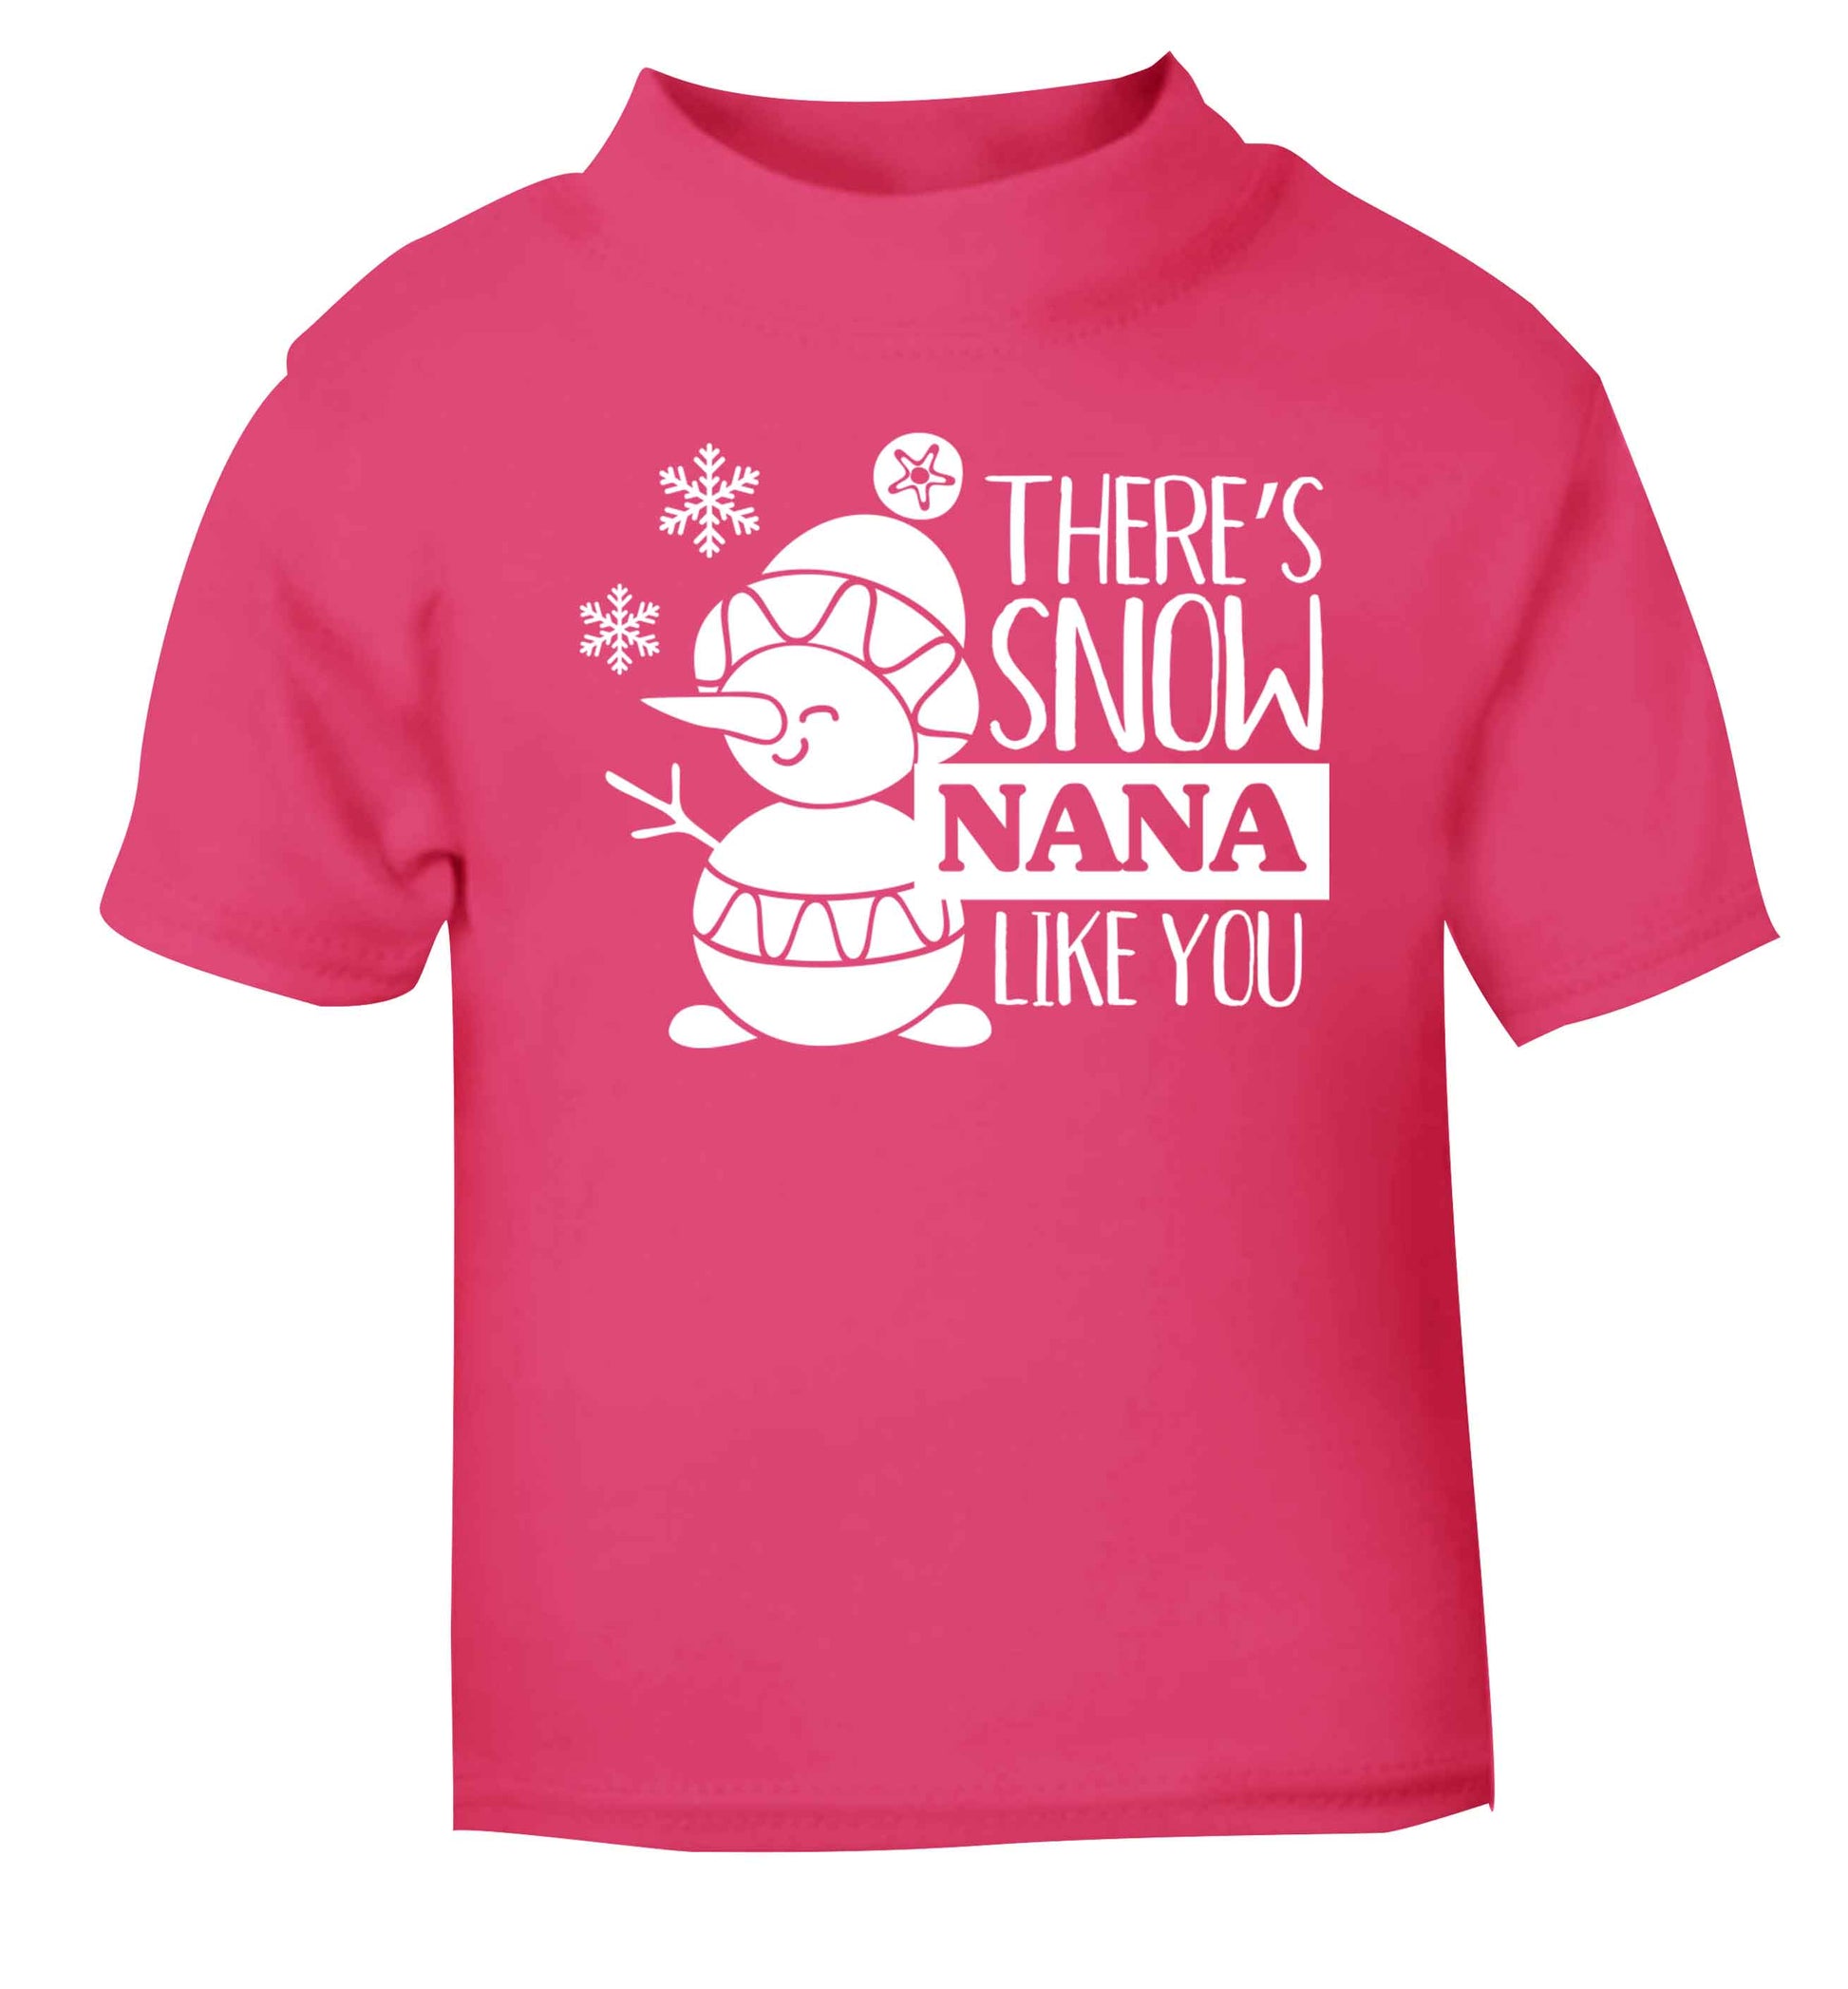 There's snow nana like you pink baby toddler Tshirt 2 Years